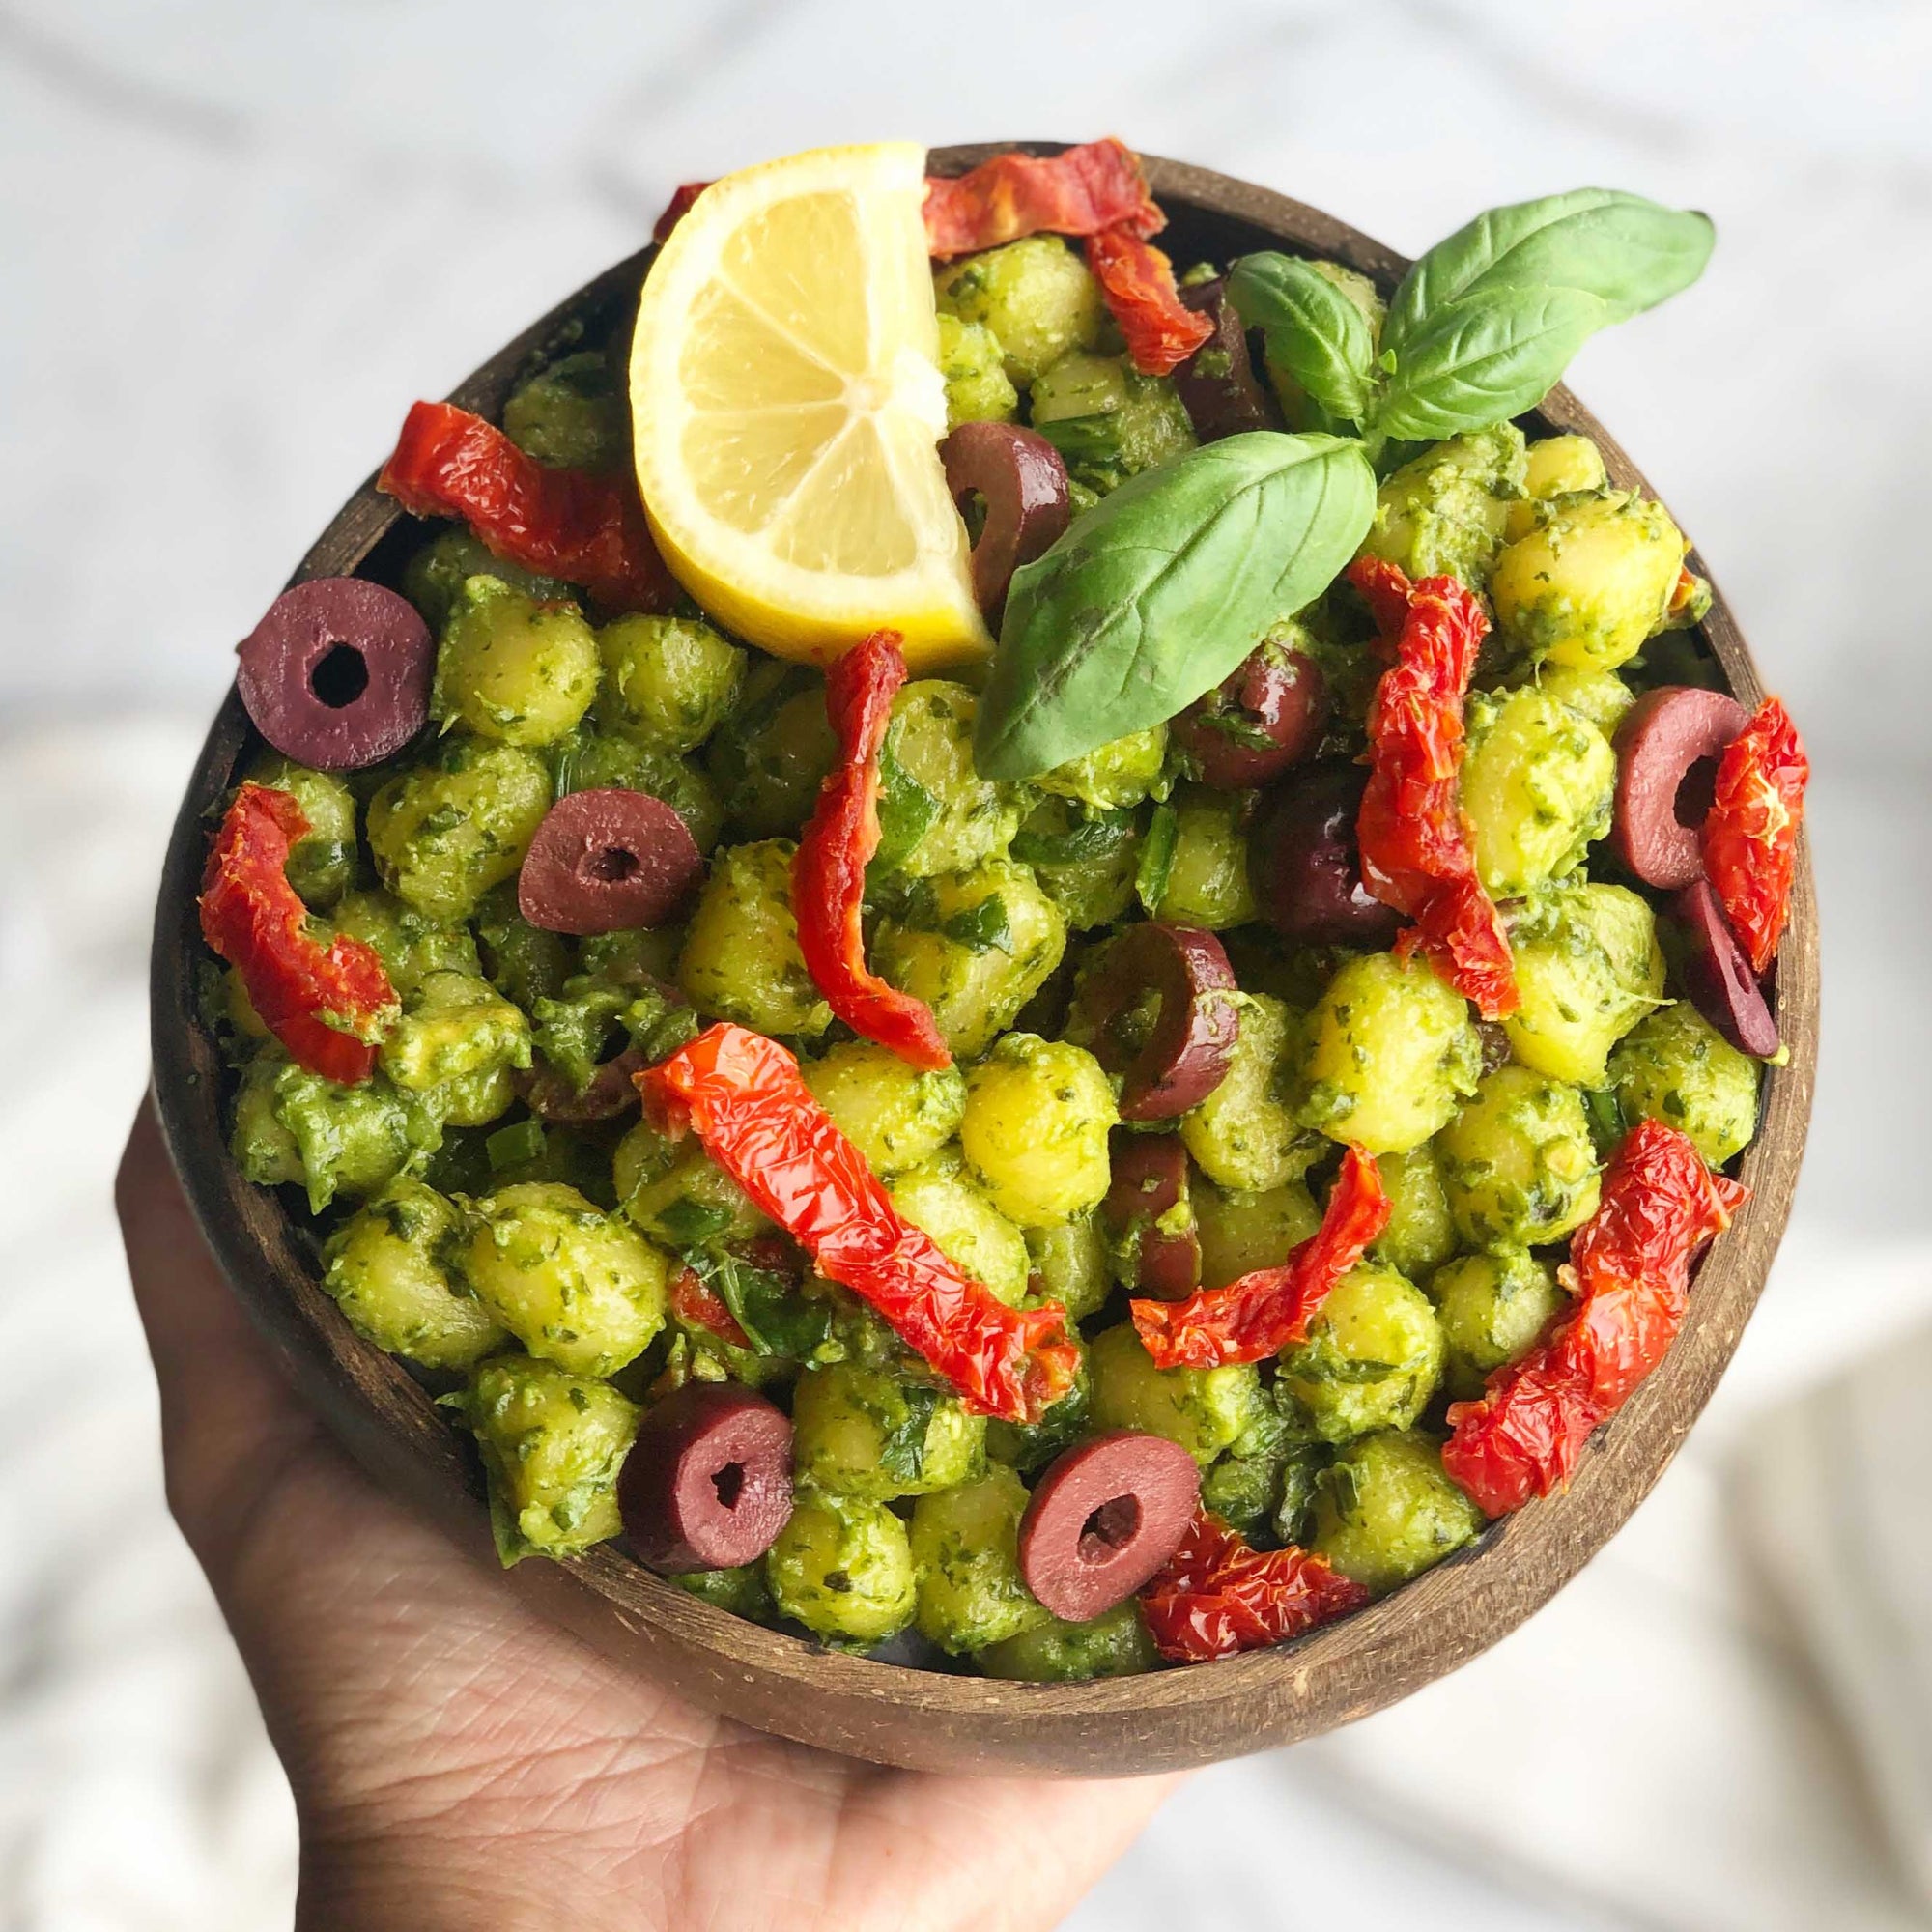 Pesto Gnocchi with Olives & Sun-dried Tomatoes